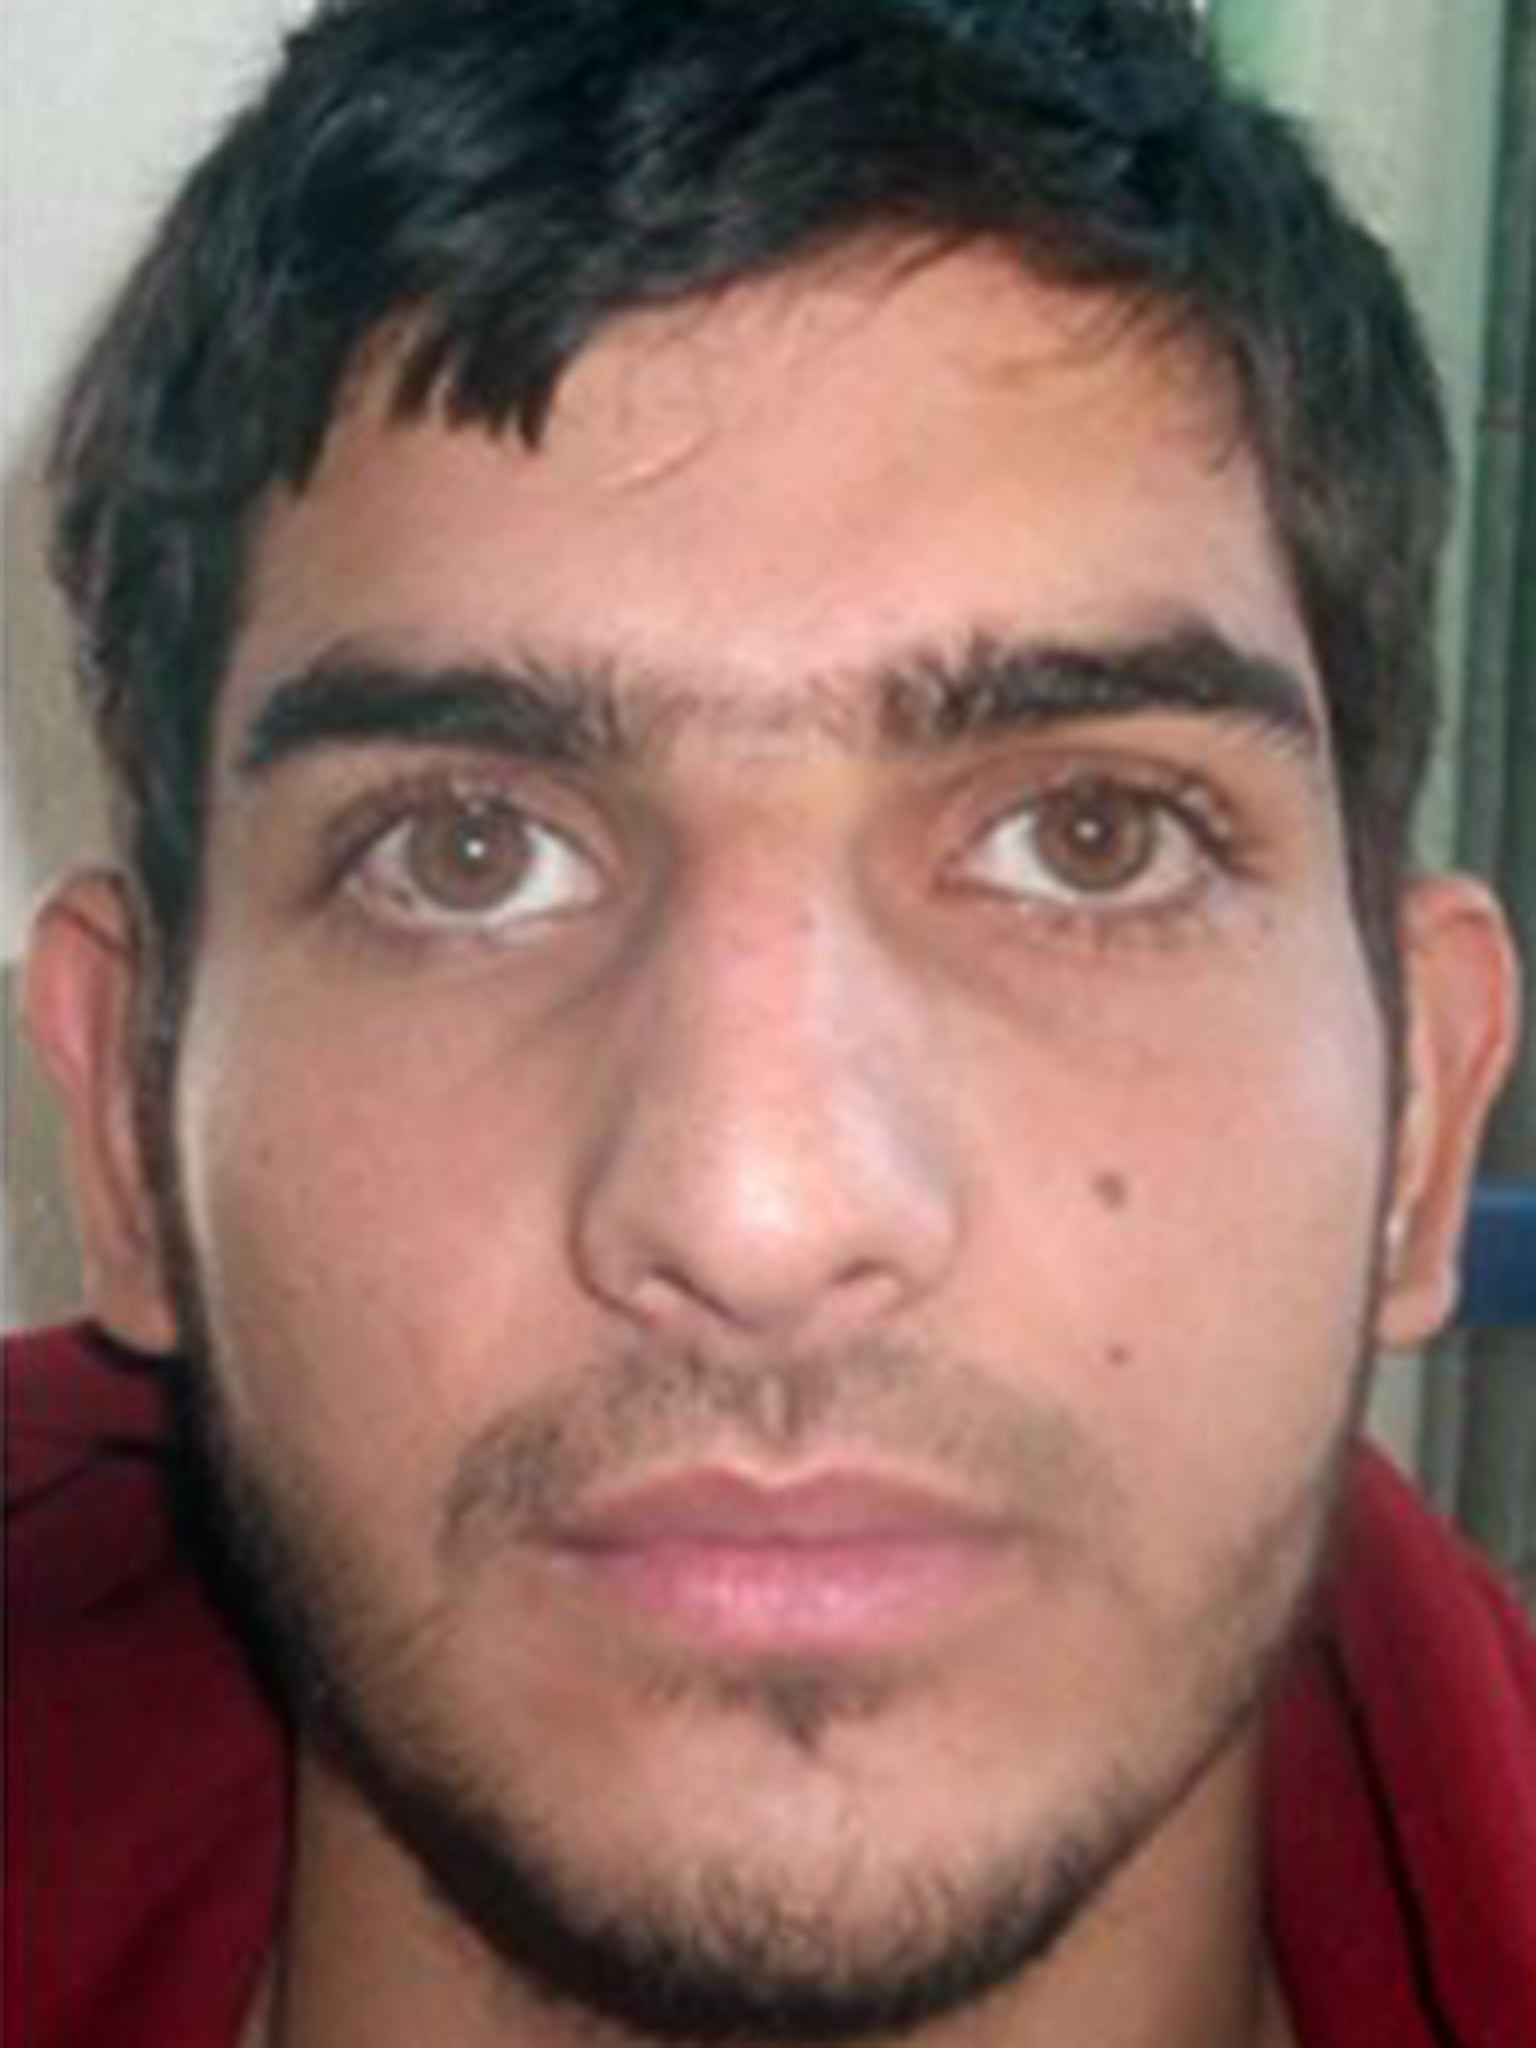 The second of the unidentified men believed to have been involved in the Paris attacks